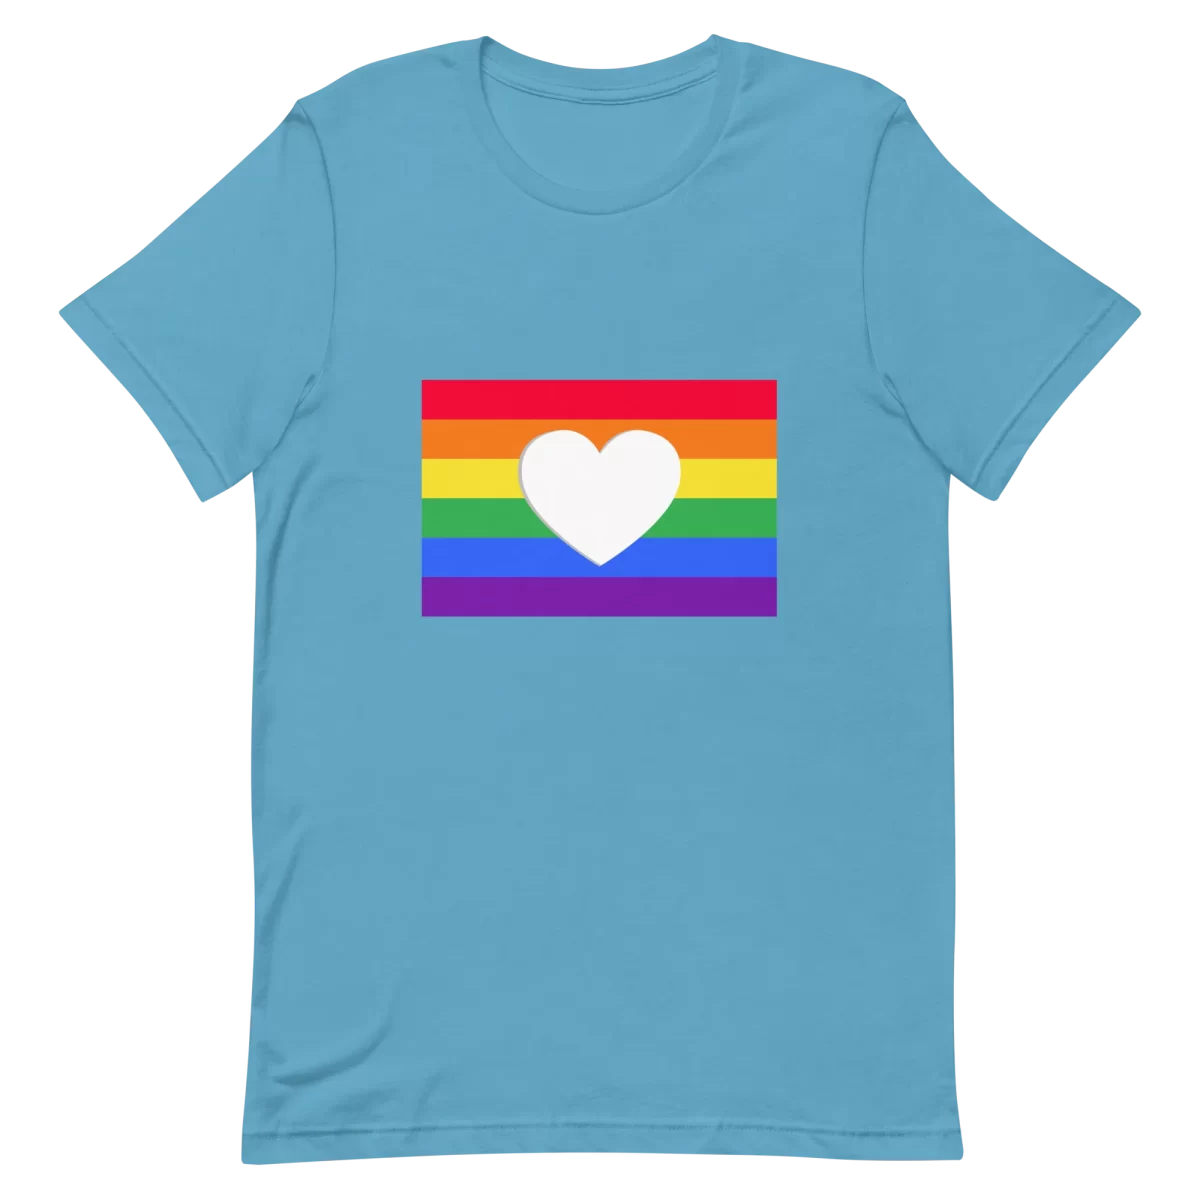 Ocean Blue Unisex t-shirt Pride Day Flag With Heart